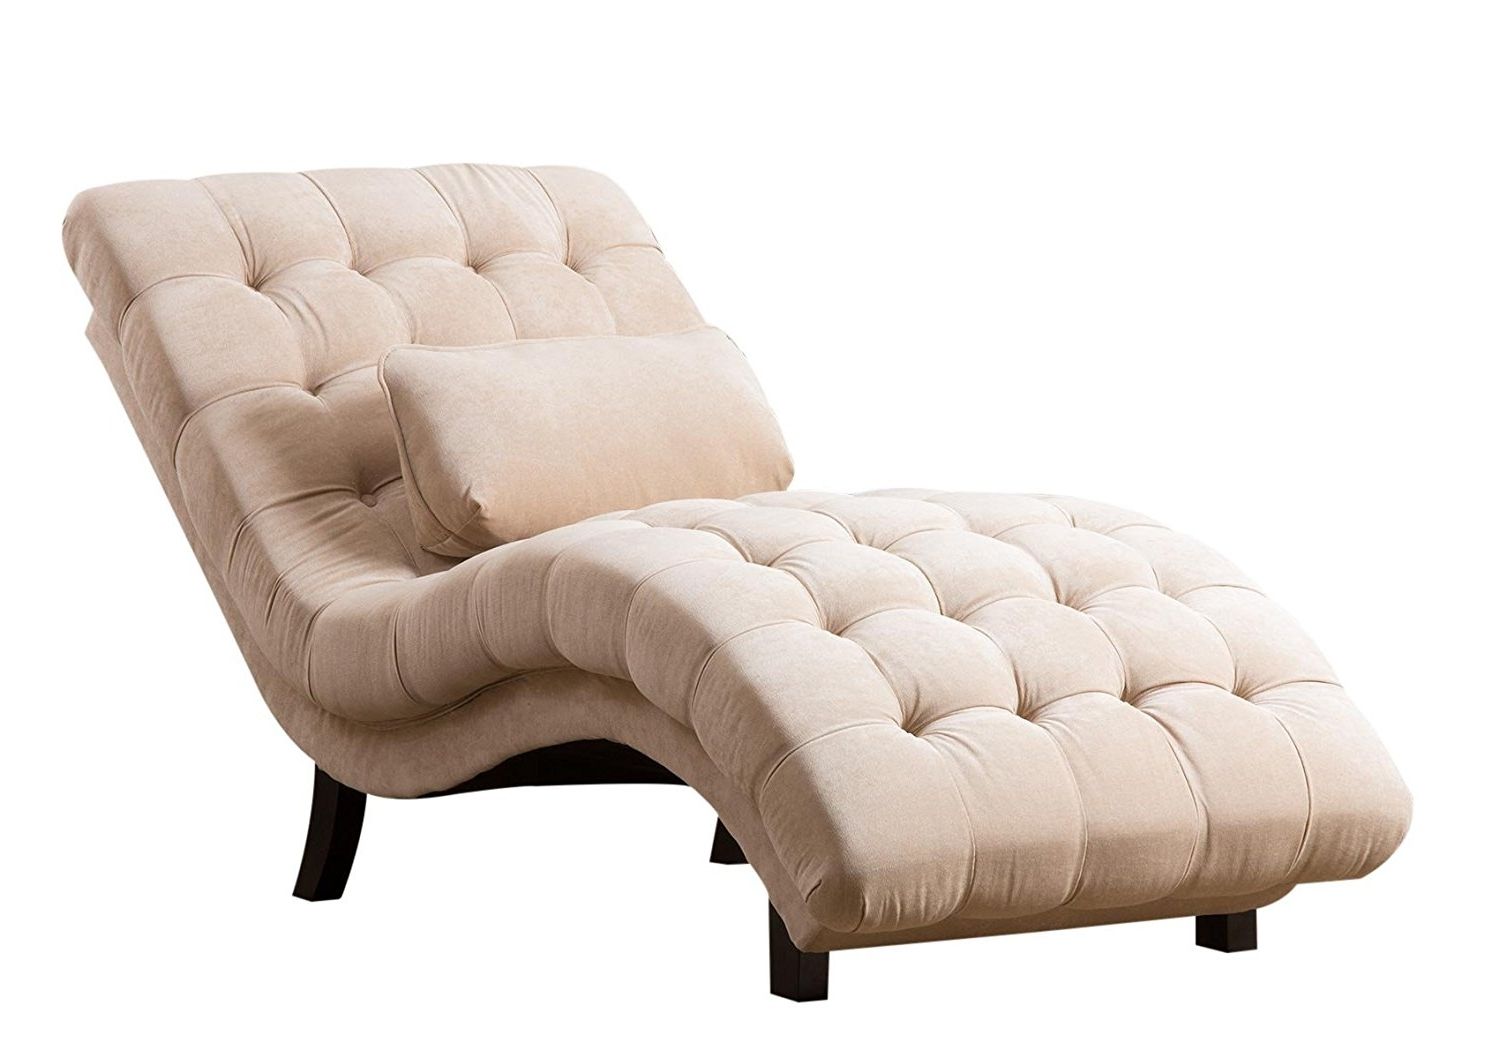 Most Recent Beige Chaise Lounges With Regard To Amazon: Abbyson Carmen Cream Fabric Chaise: Home & Kitchen (View 12 of 15)